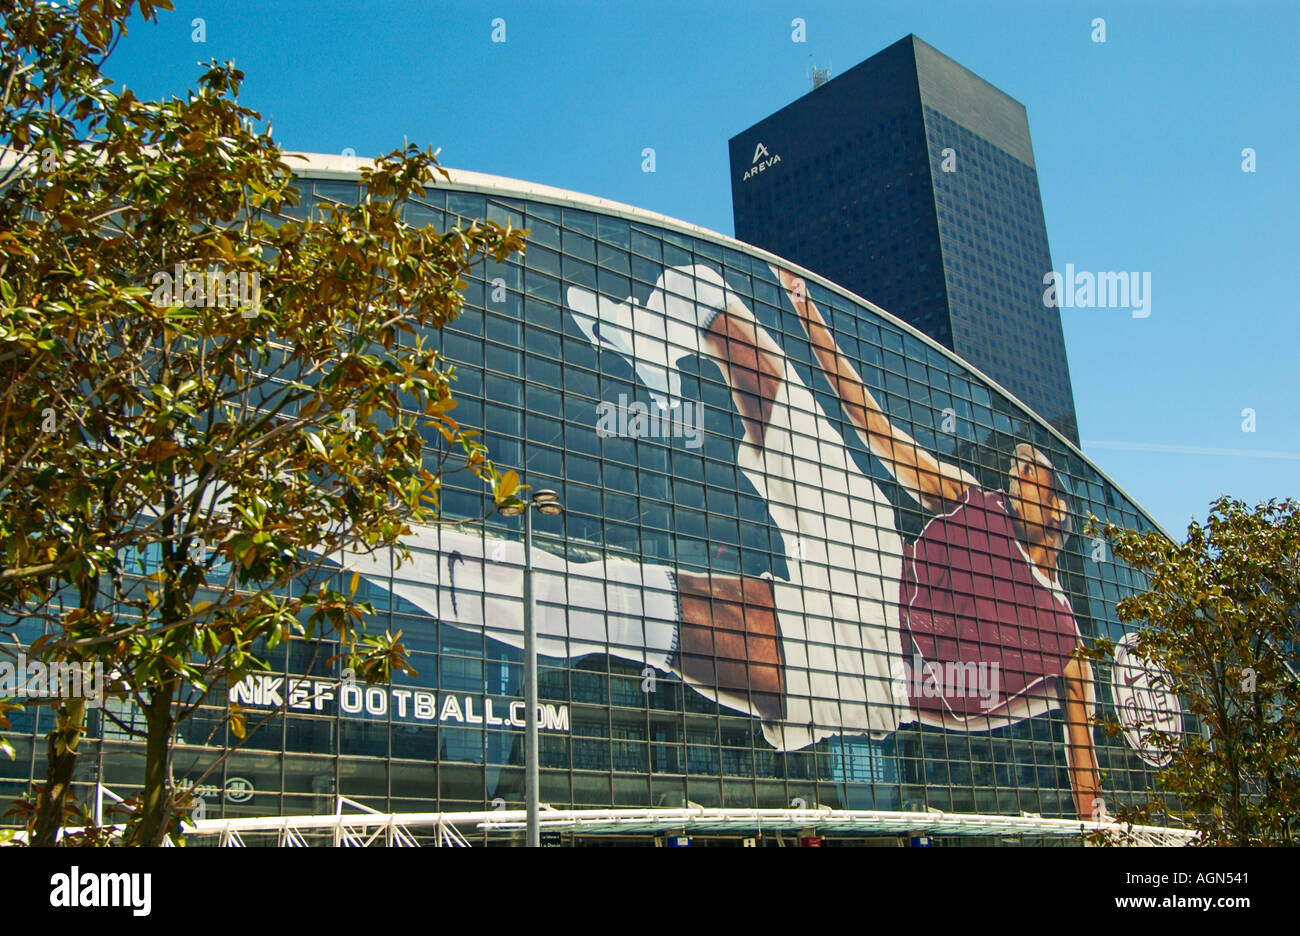 cnit paris la defense huge picture of thierry henry nike advertising Stock  Photo - Alamy